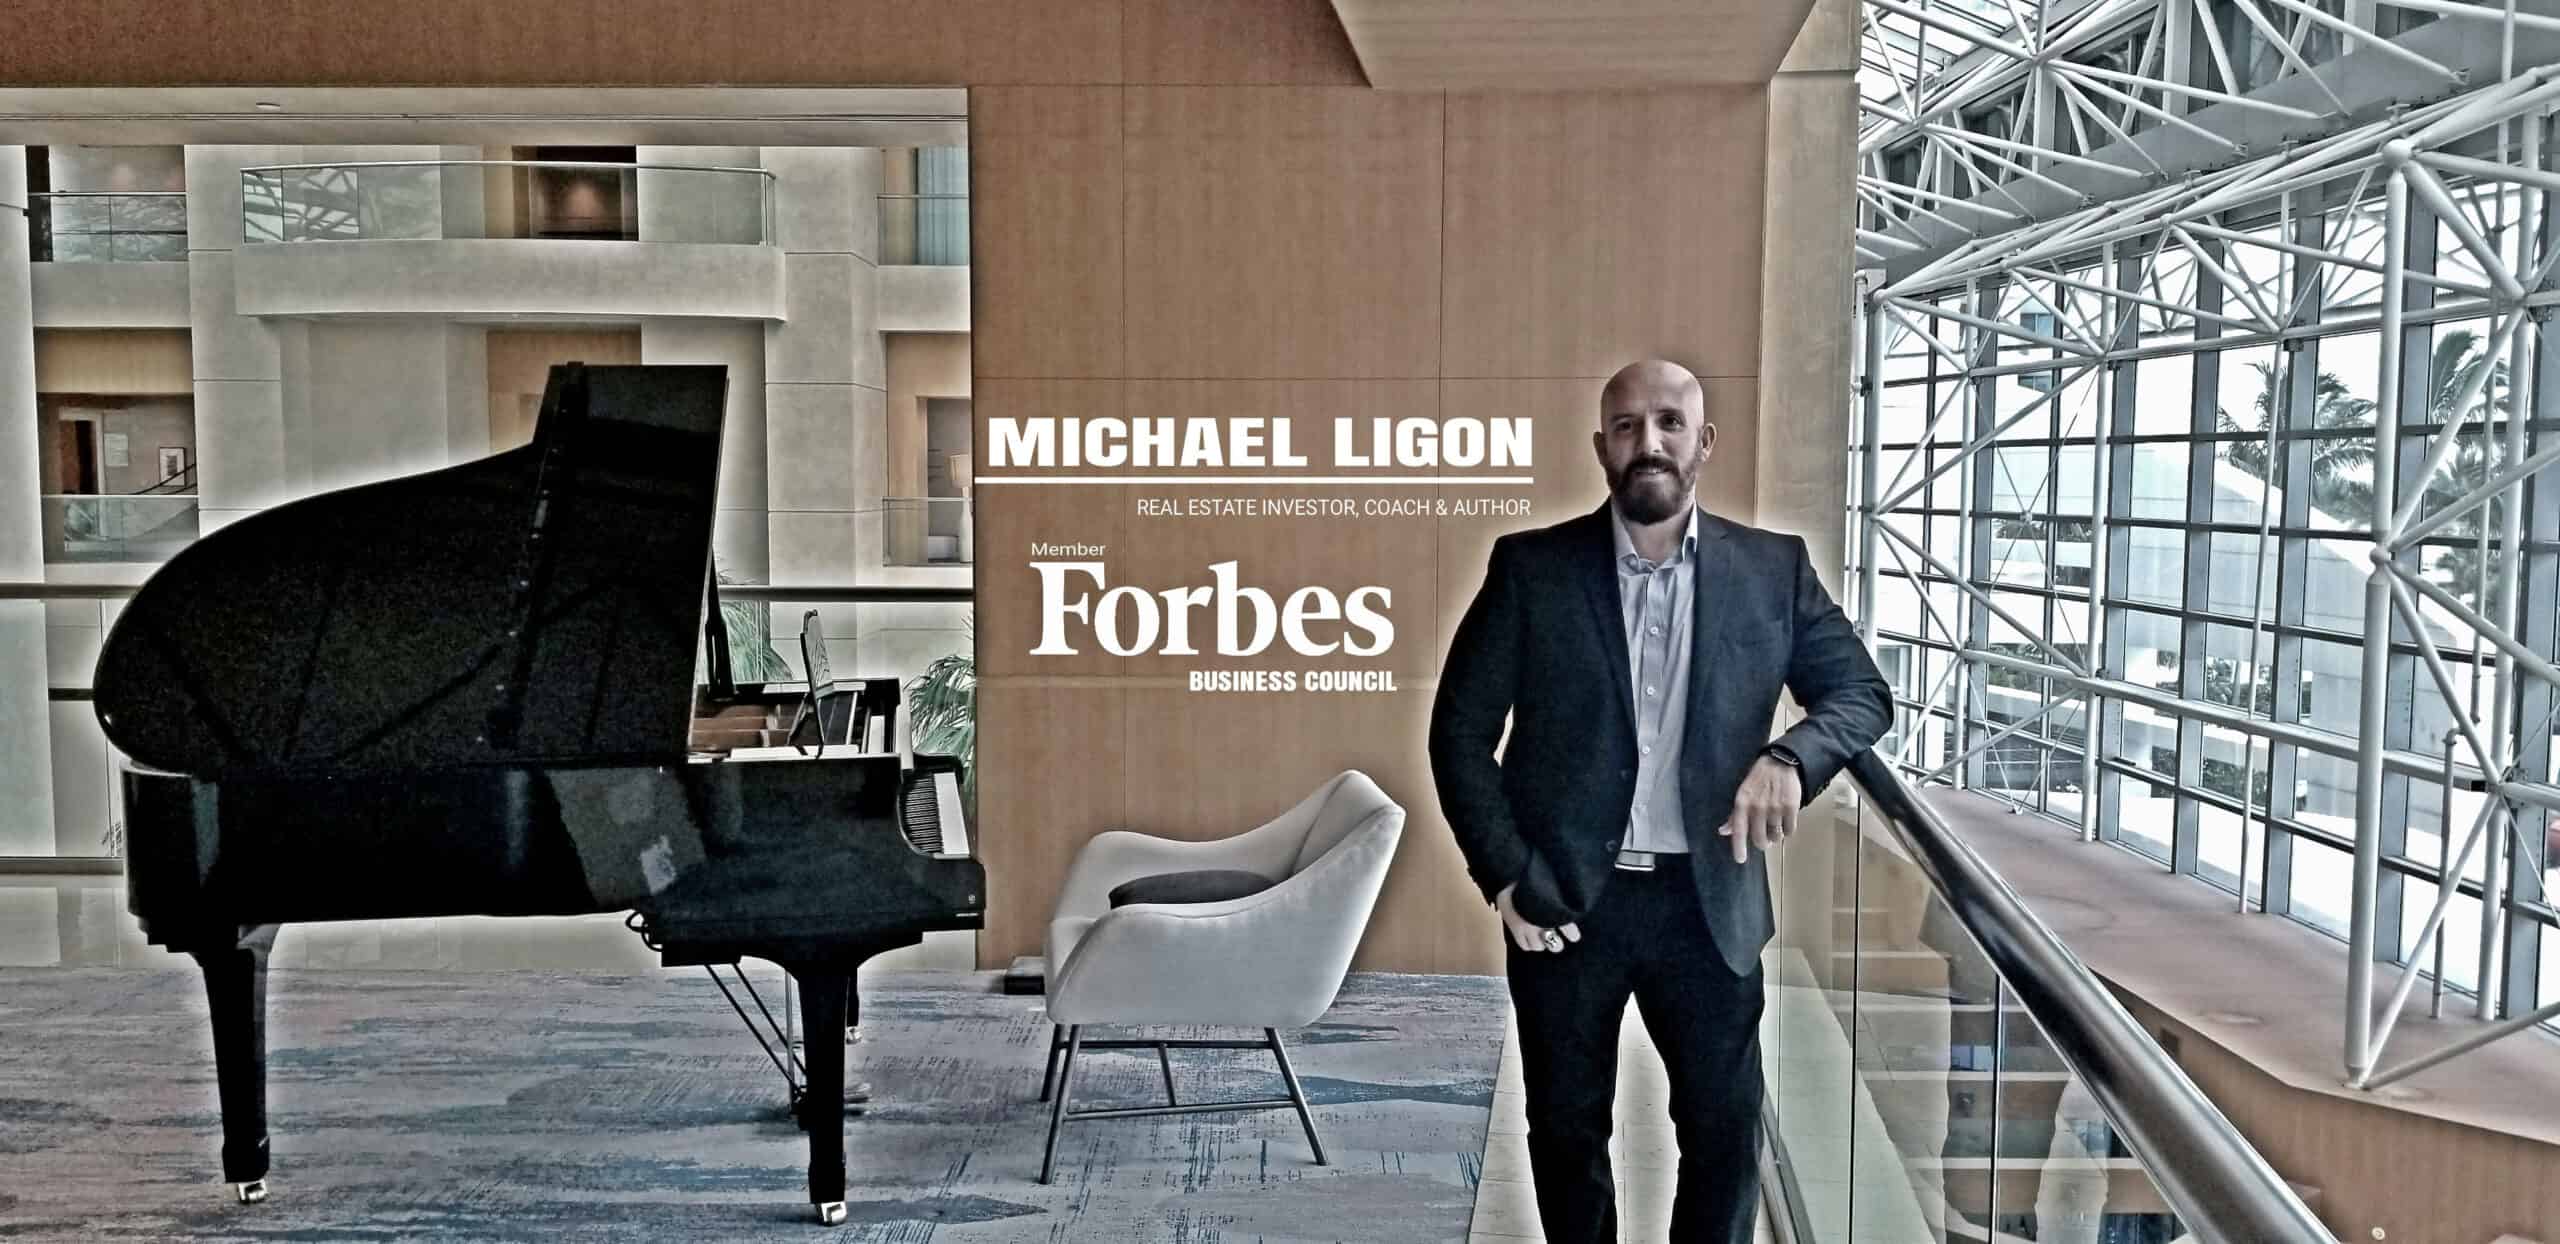 Michael Ligon of The Ligon Brothers accepted into Forbes Business Council